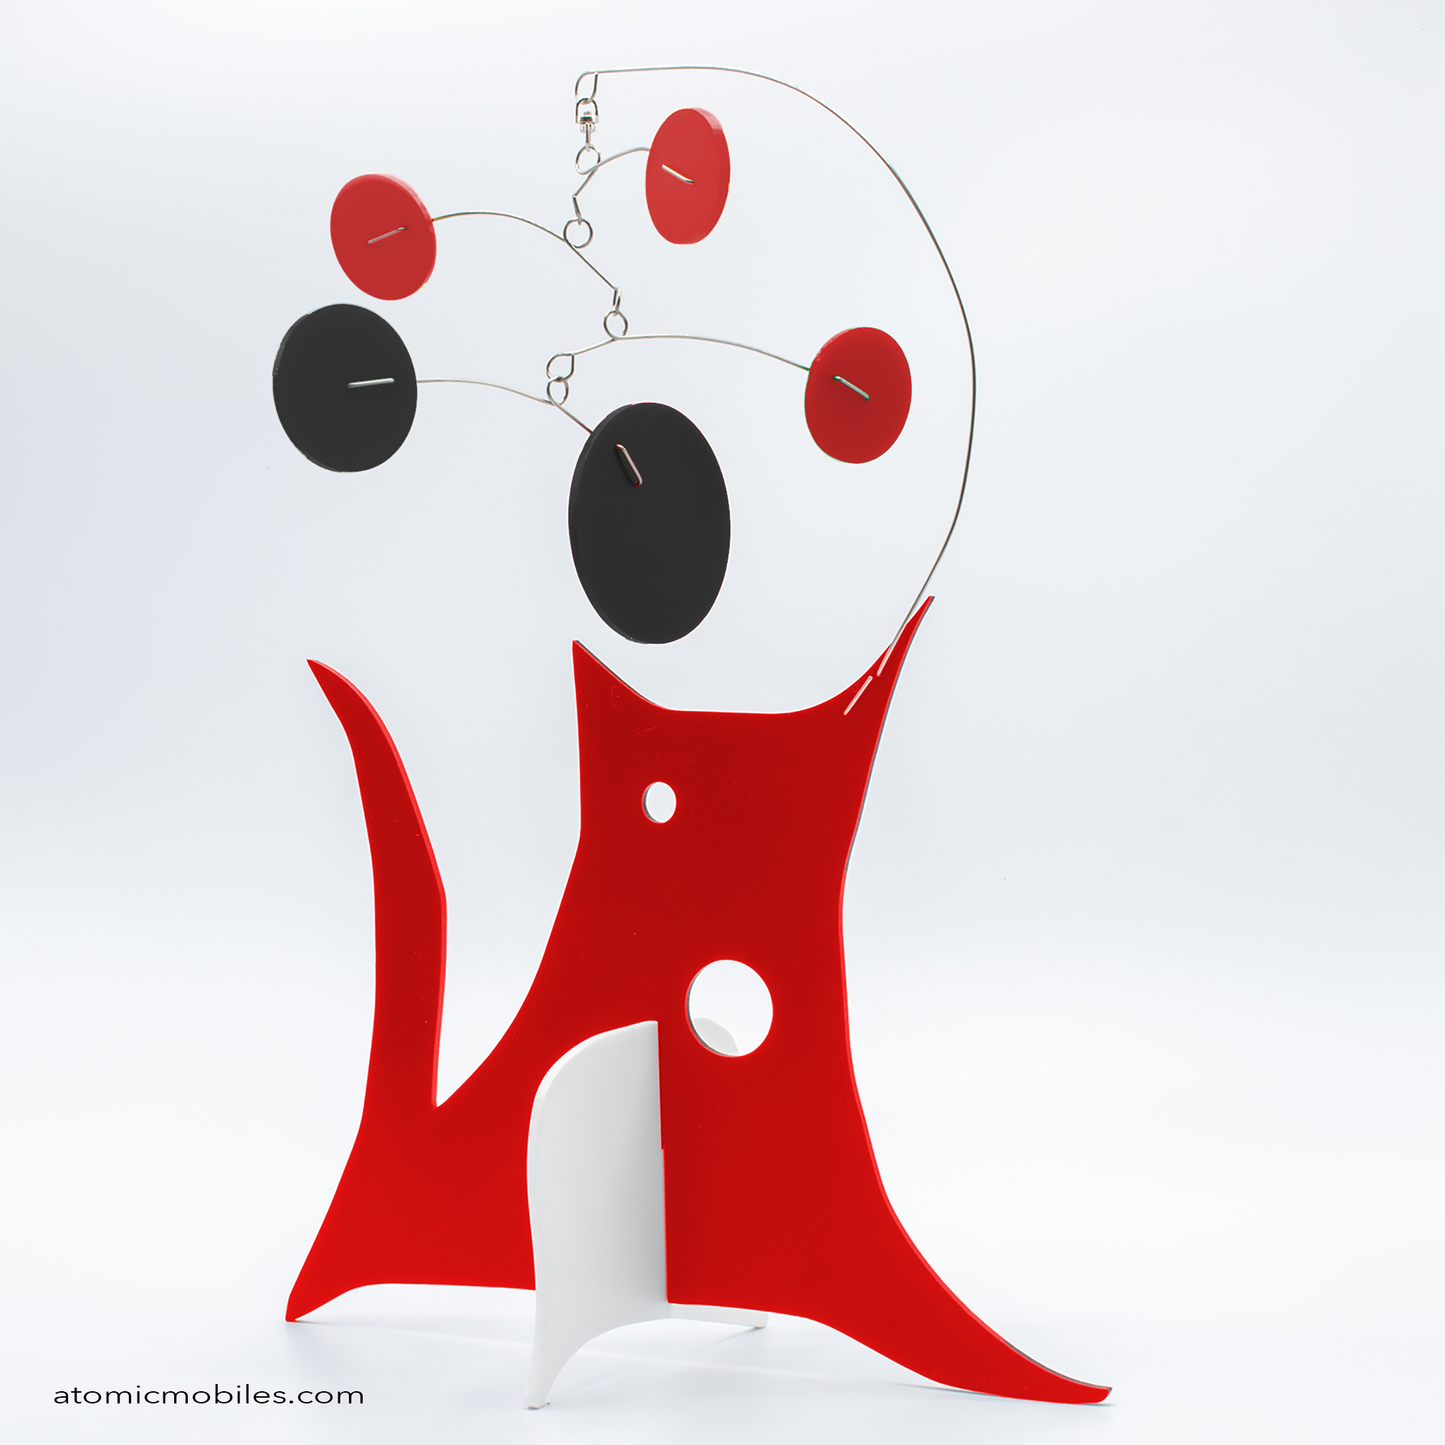 KinetiCats Collection Cat in Red, Black, White - one of 12 Modern Cute Abstract Animal Art Sculpture Kinetic Stabiles inspired by Dada and mid century modern style art by AtomicMobiles.com